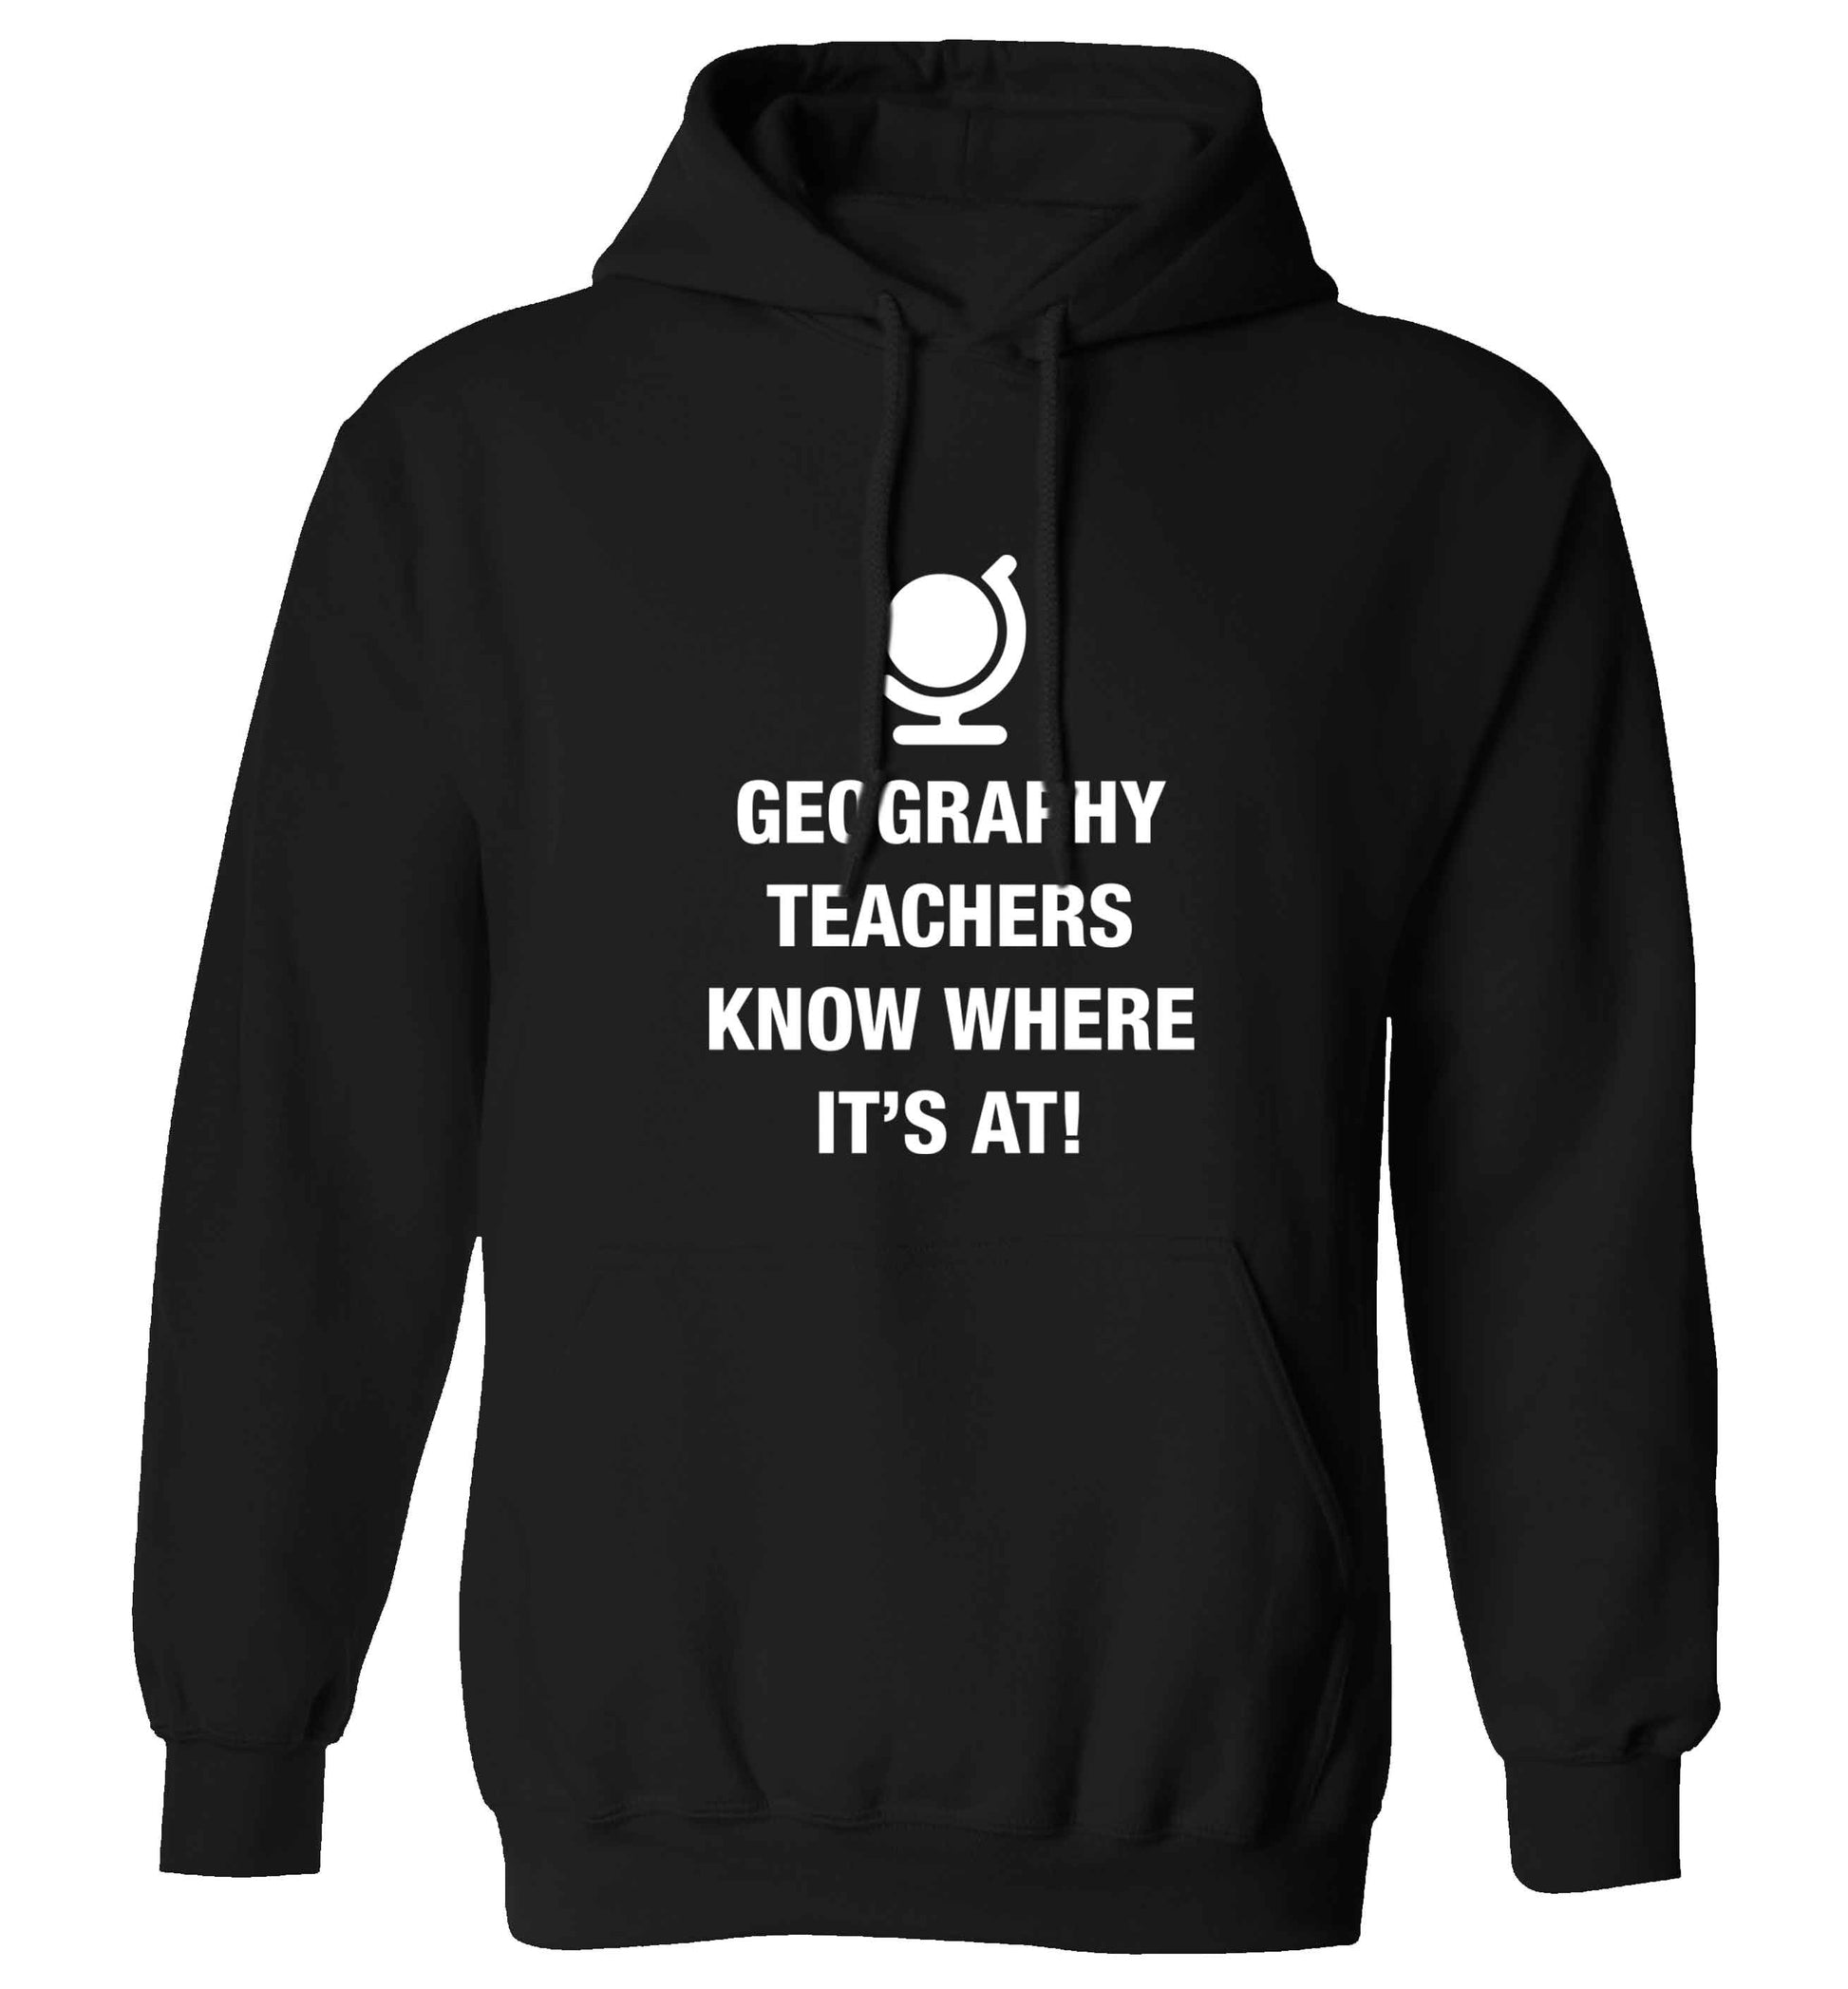 Geography teachers know where it's at adults unisex black hoodie 2XL